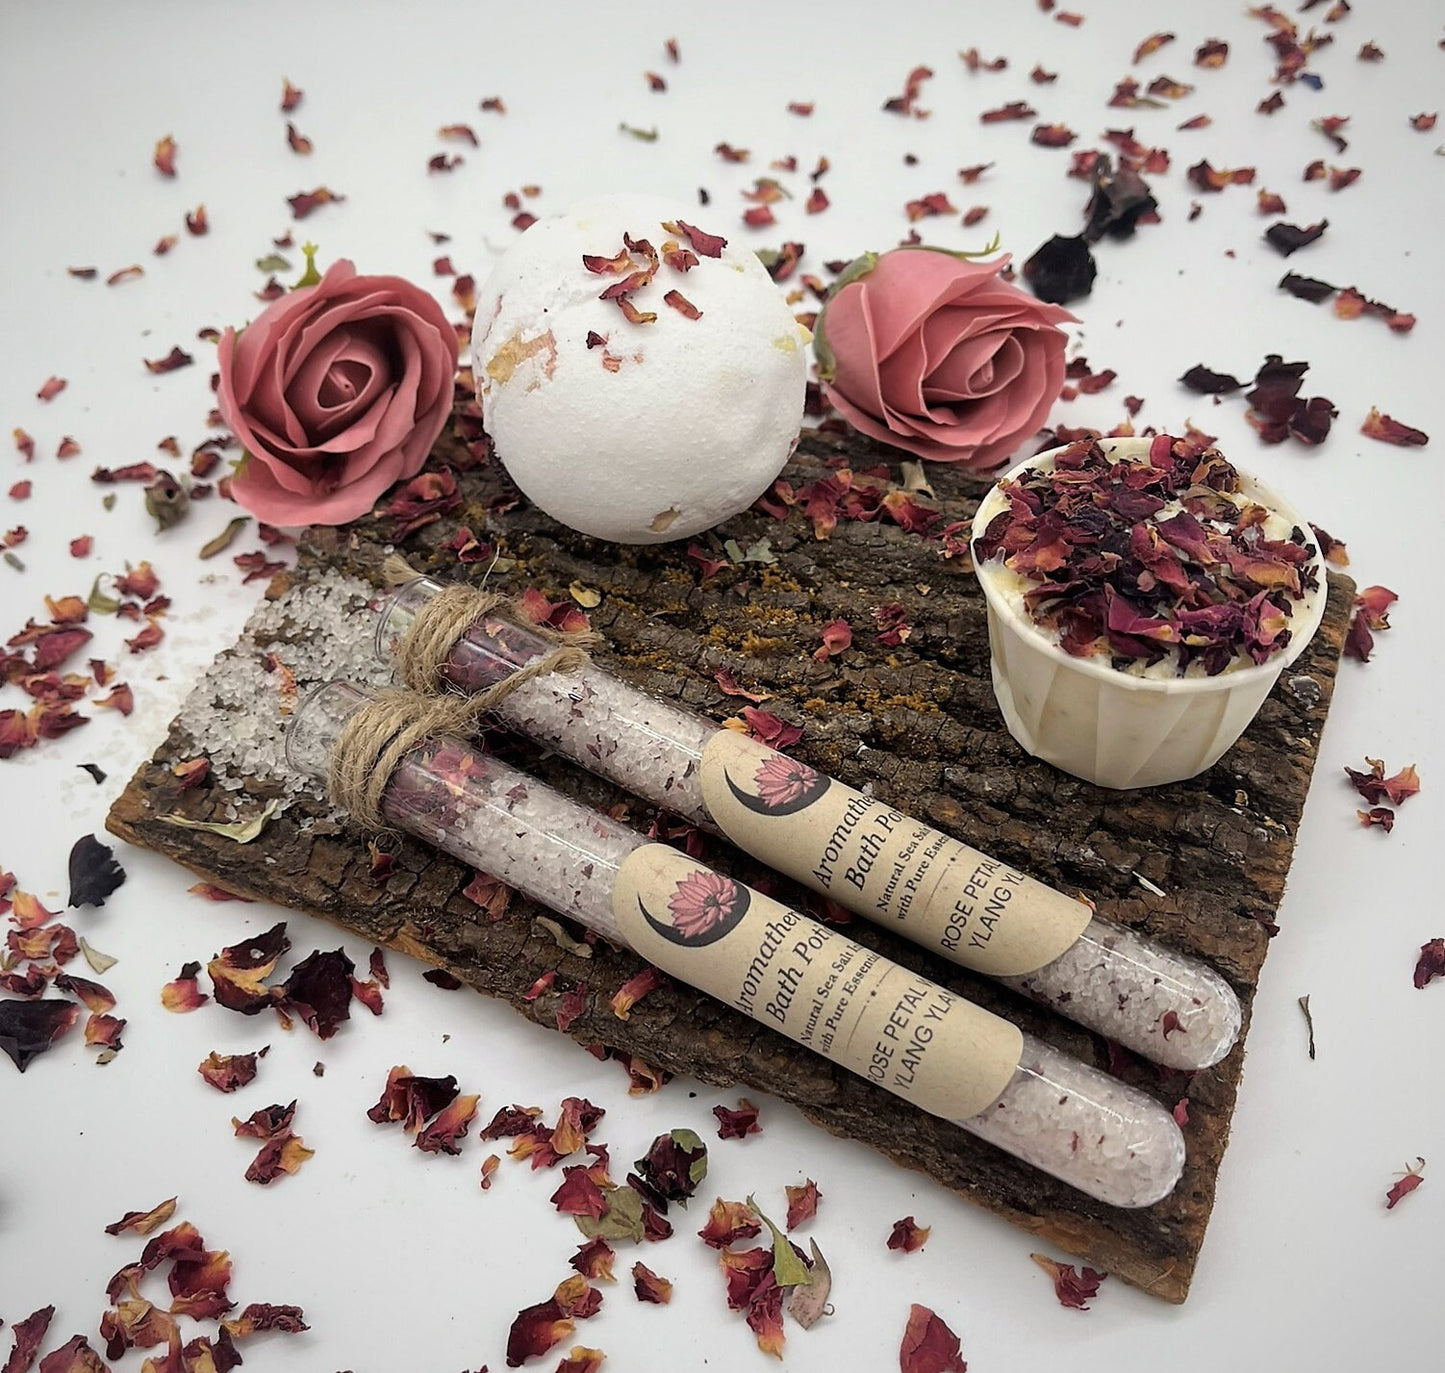 NEW Wonderful Rose Handmade Spa Collection, Pure Luxury & Relaxation, Ladies Gift Hamper, Unique Gift, Bath Ritual, Love Ritual, Birthday,